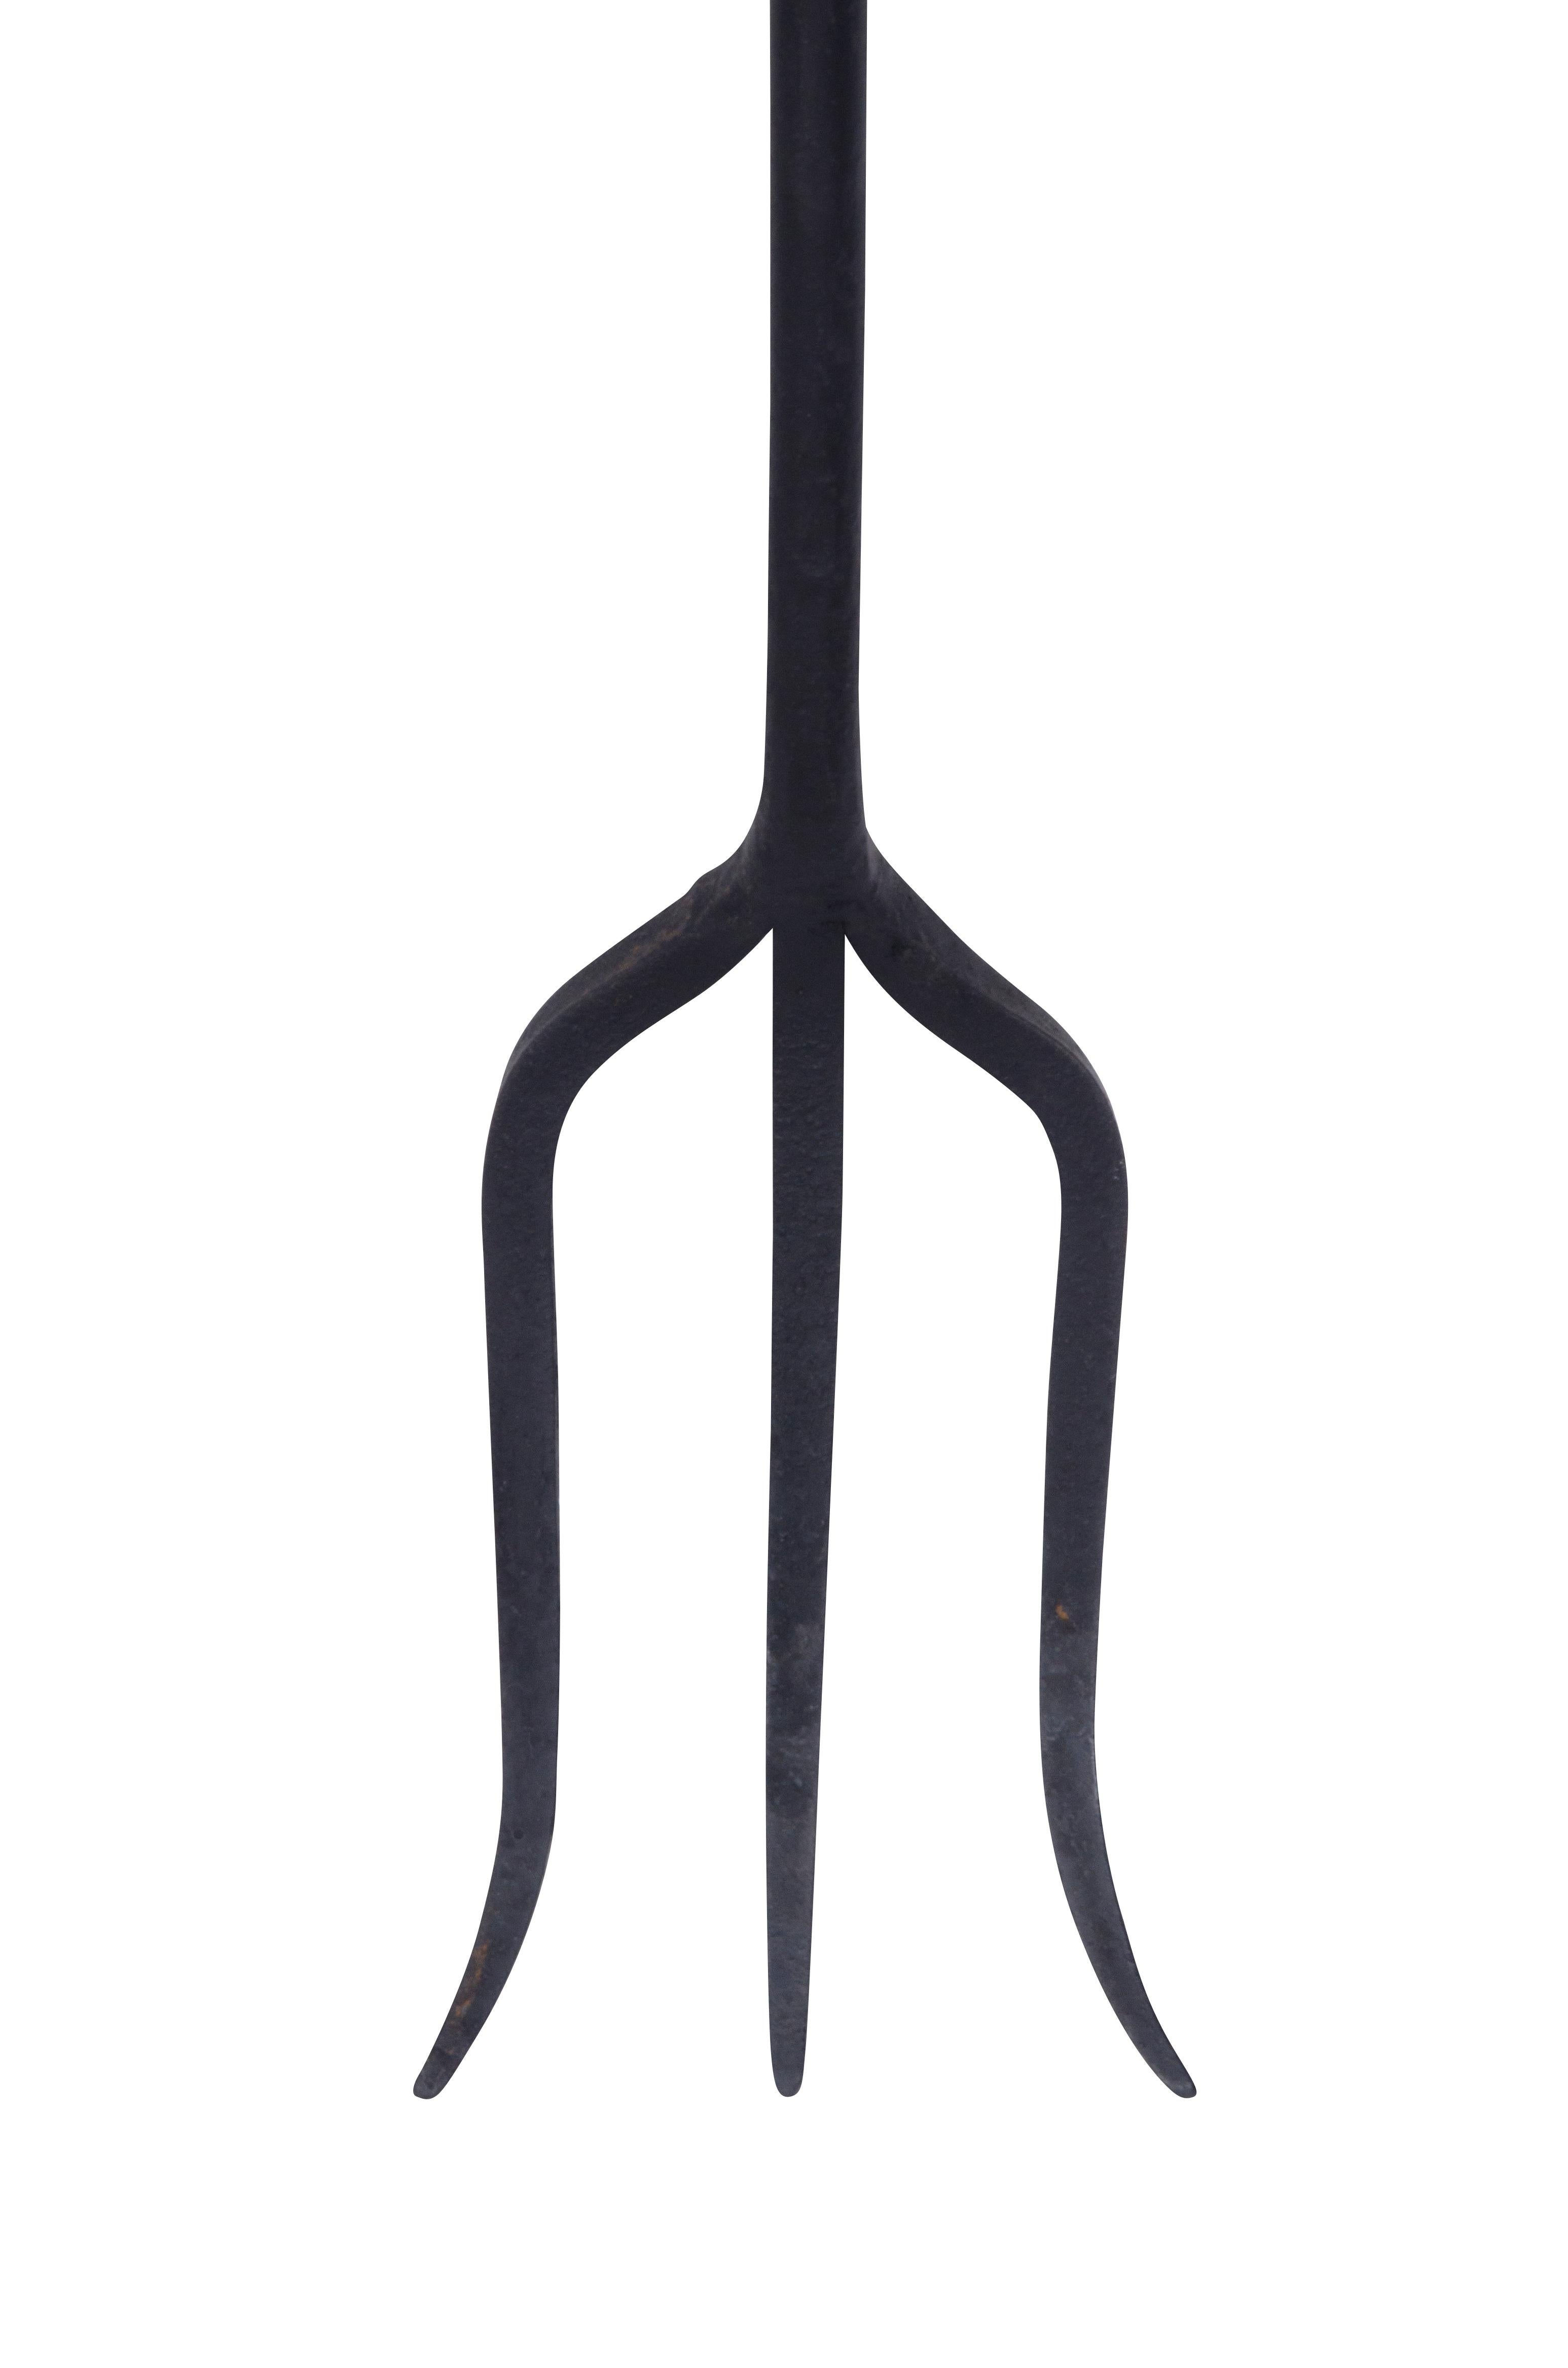 American Brass and Wrought Iron Fireplace Fork